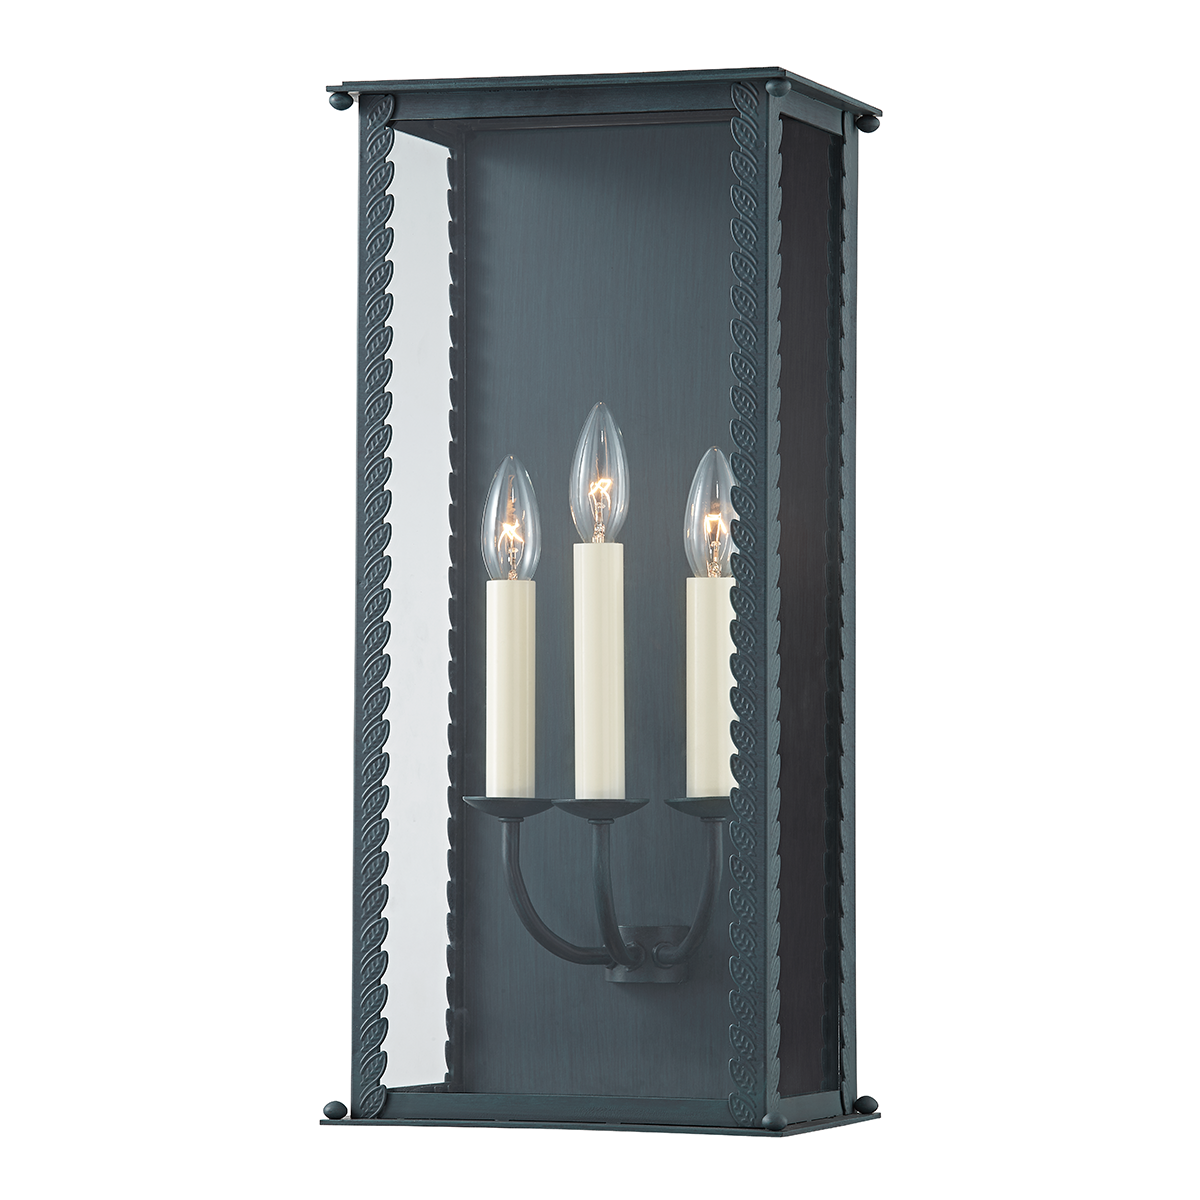 Troy Lighting 3 LIGHT LARGE EXTERIOR WALL SCONCE B6713